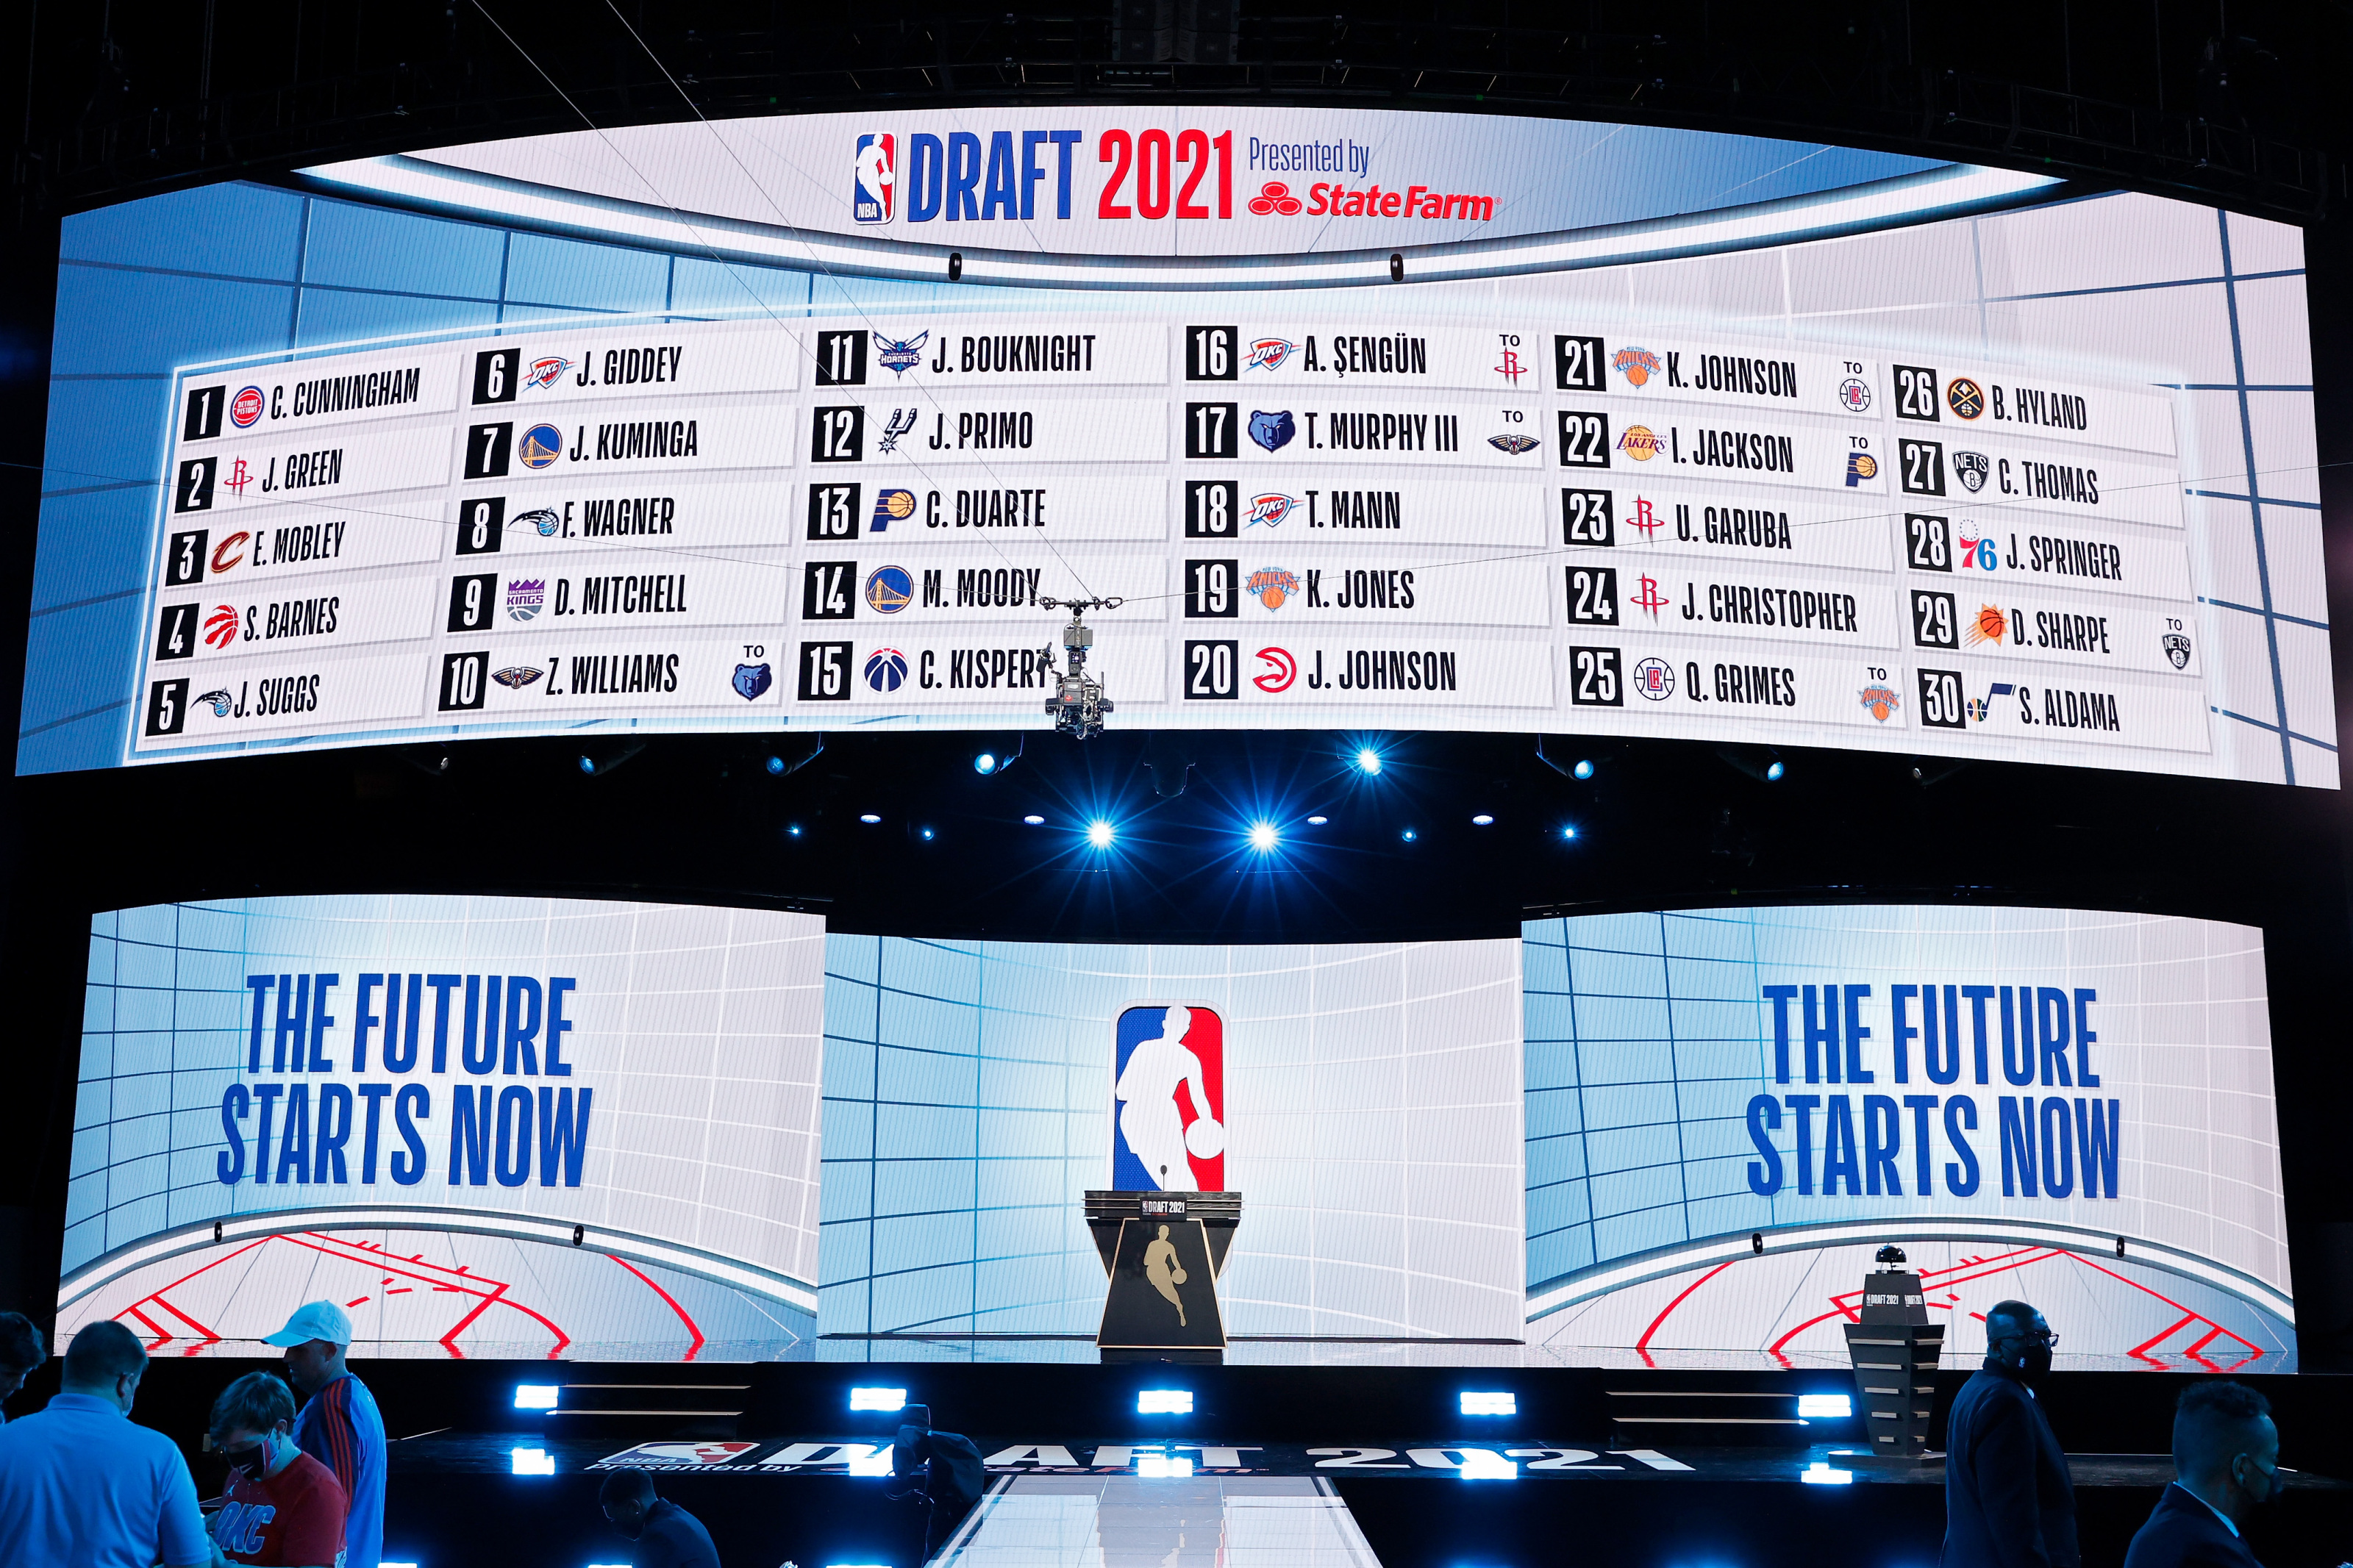 Options for the New Orleans Pelicans with their 2nd-round picks